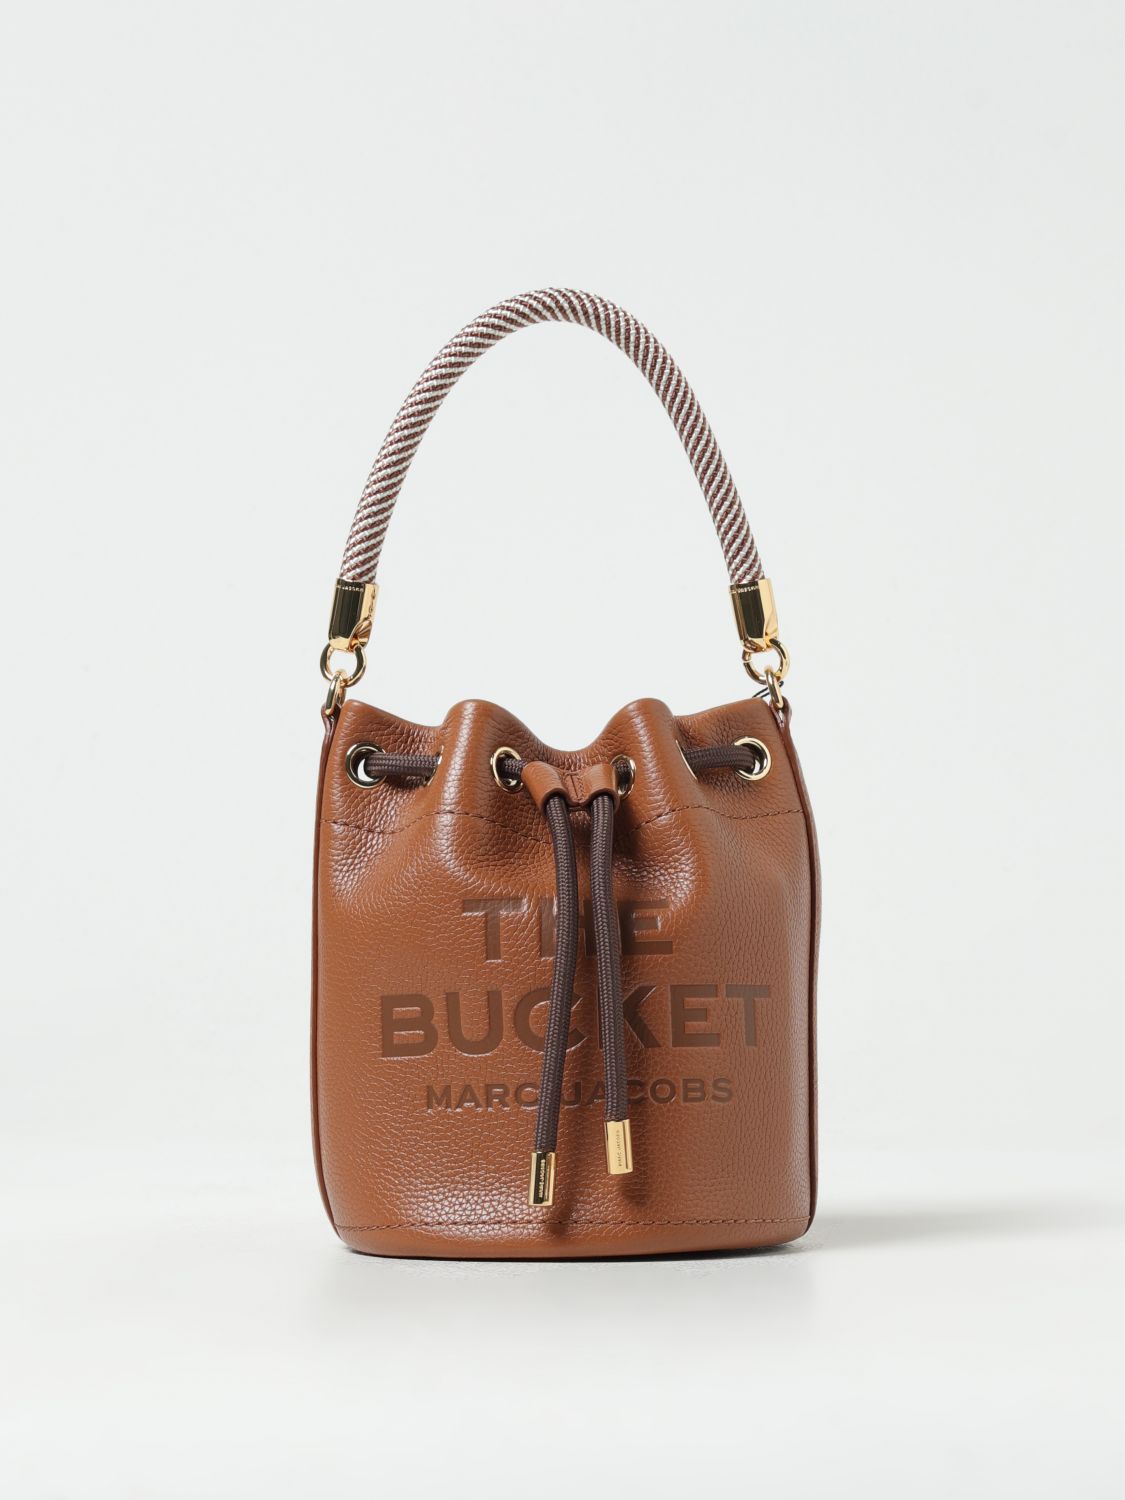 MARC JACOBS THE BUCKET BAG IN GRAINED LEATHER,F09978032